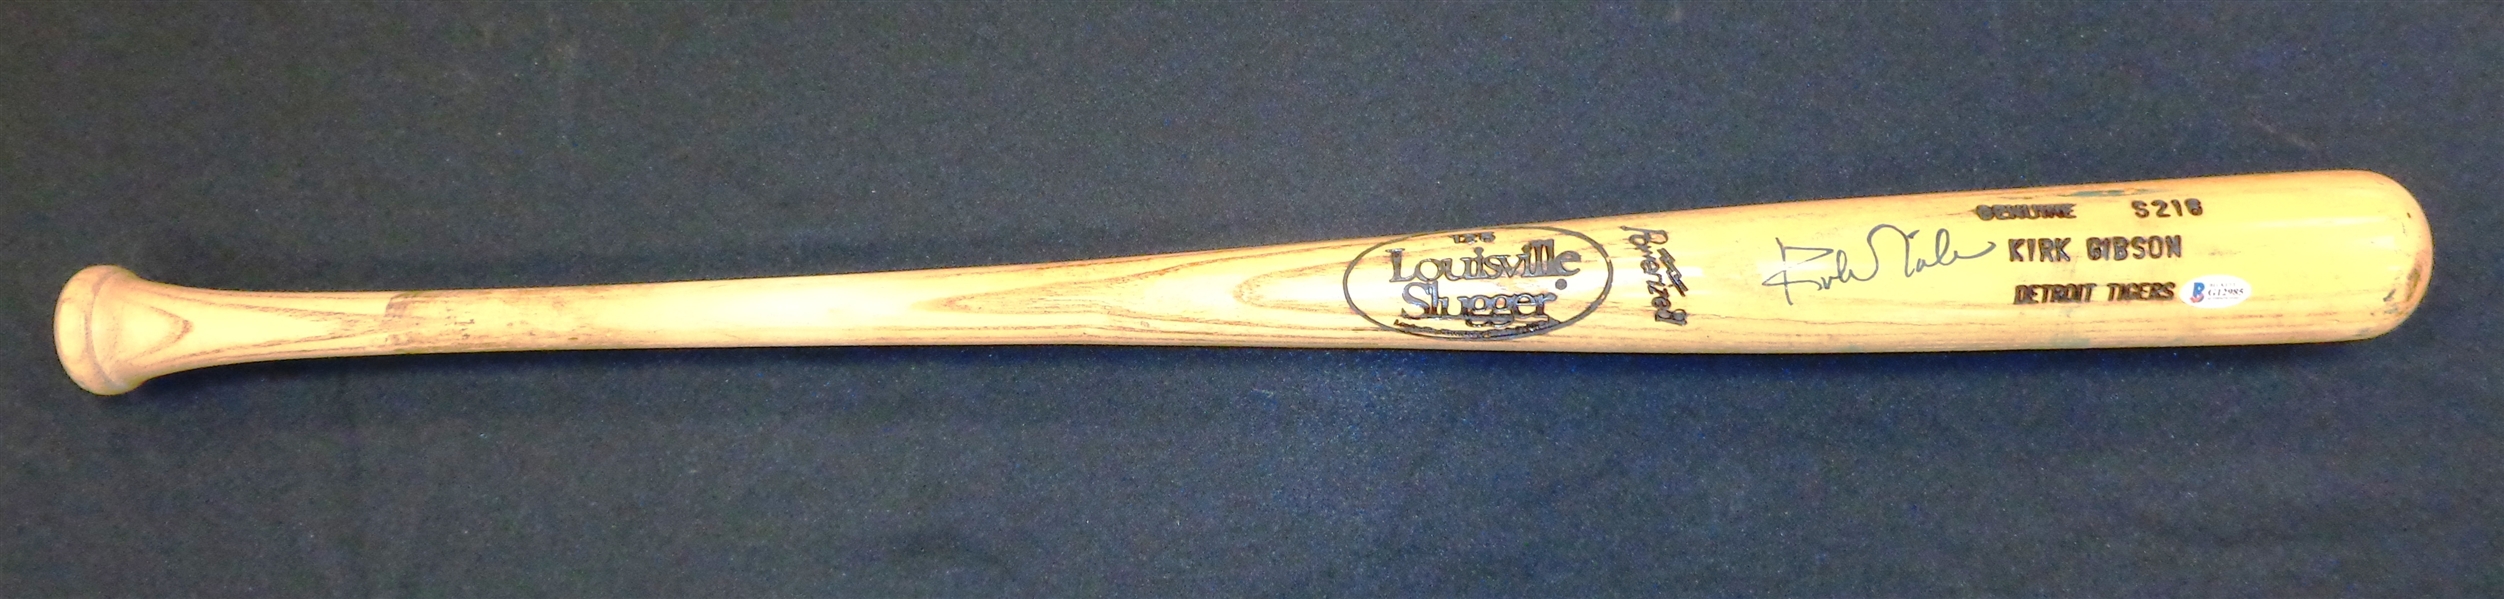 Kirk Gibson Game Used Autographed Bat